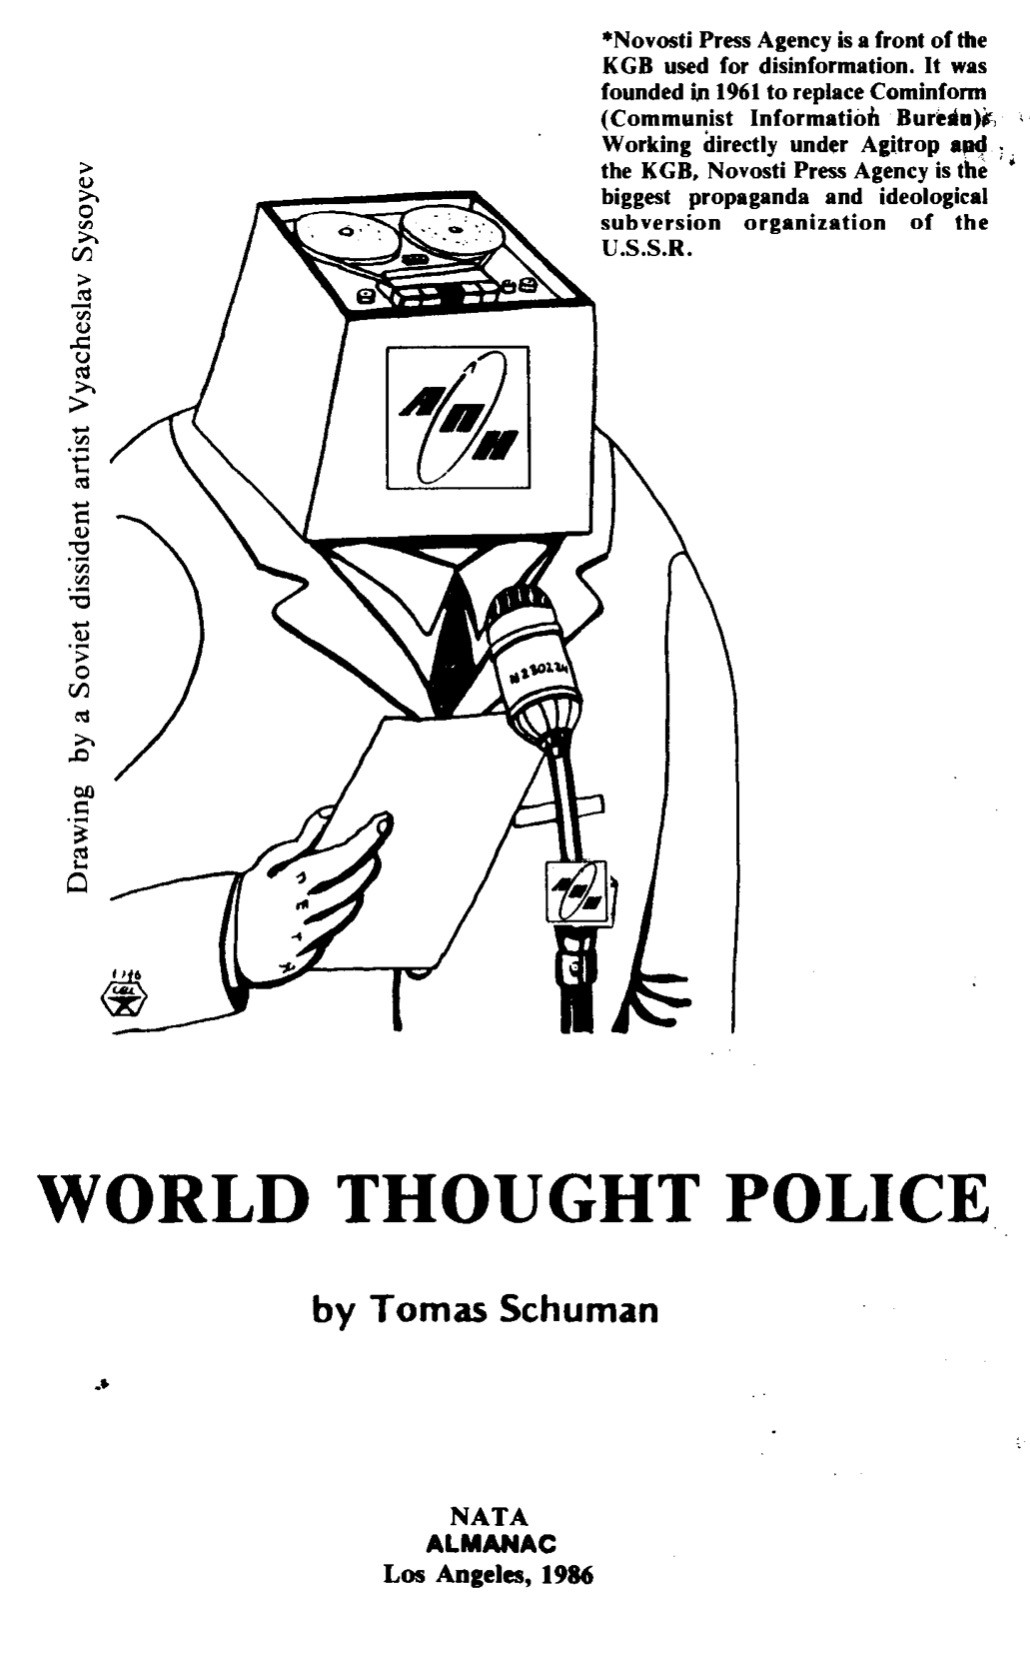 World Thought Police (1986) by Tomas Schuman